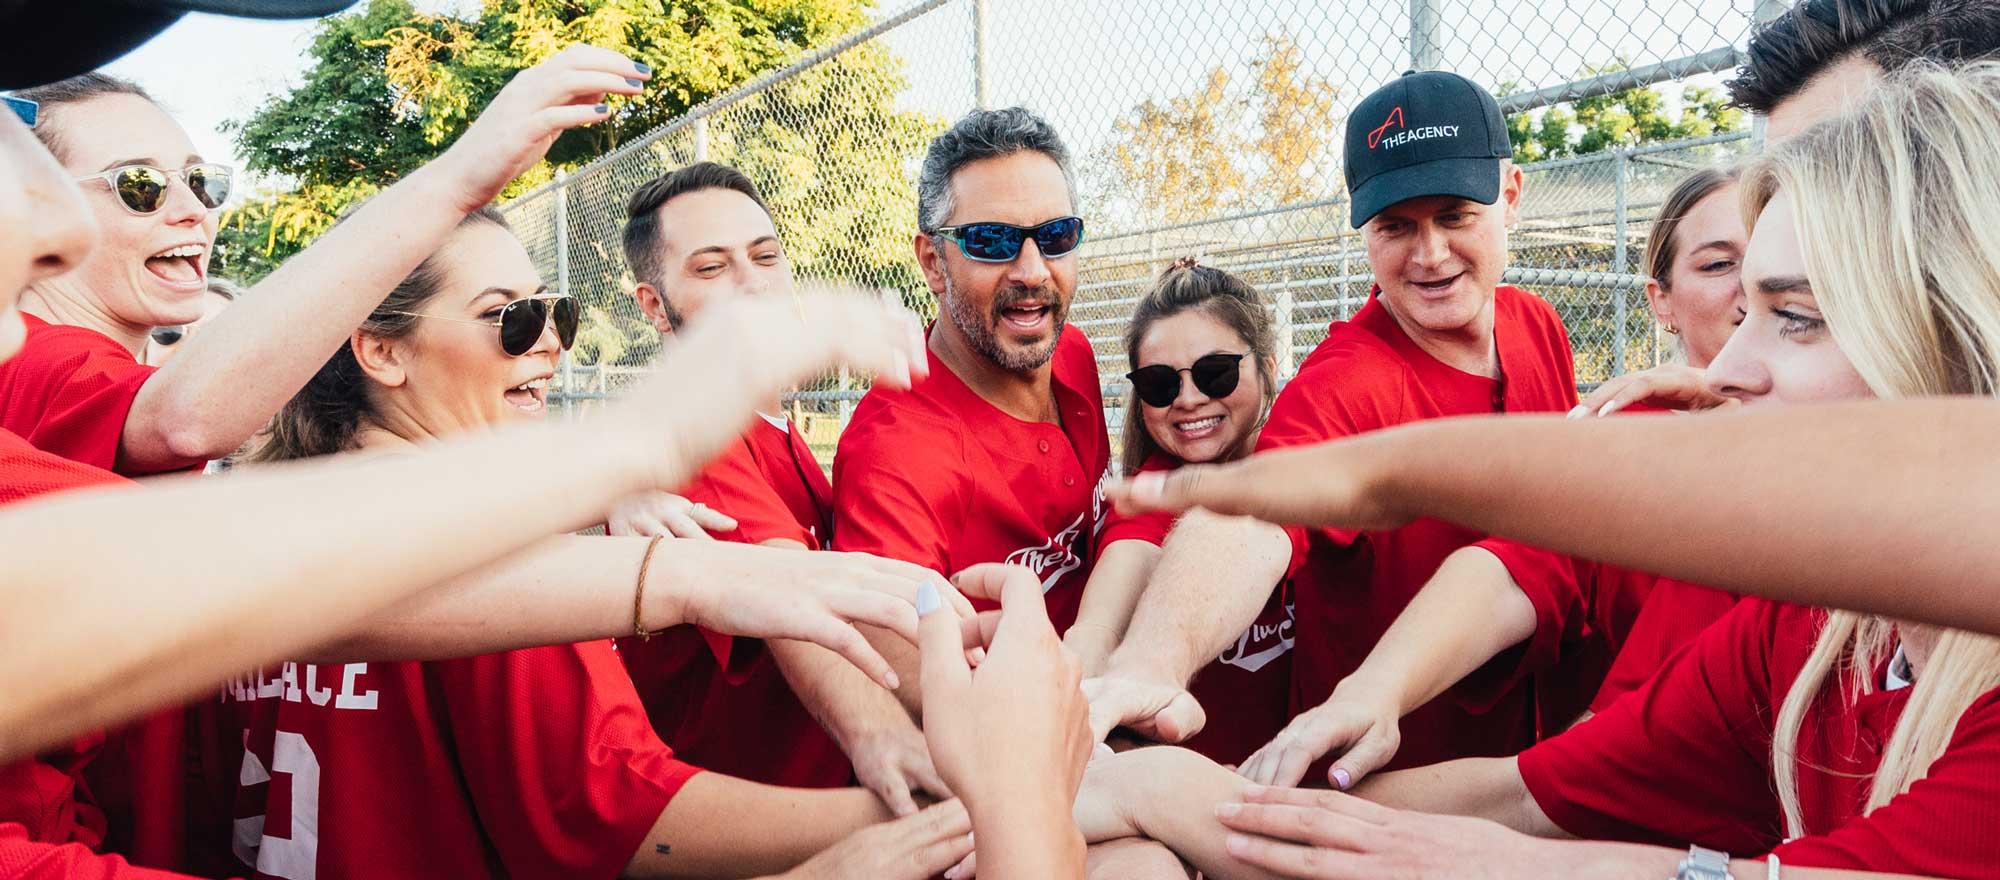 Mauricio Umansky with co-workers from The Agency in a team-building setting